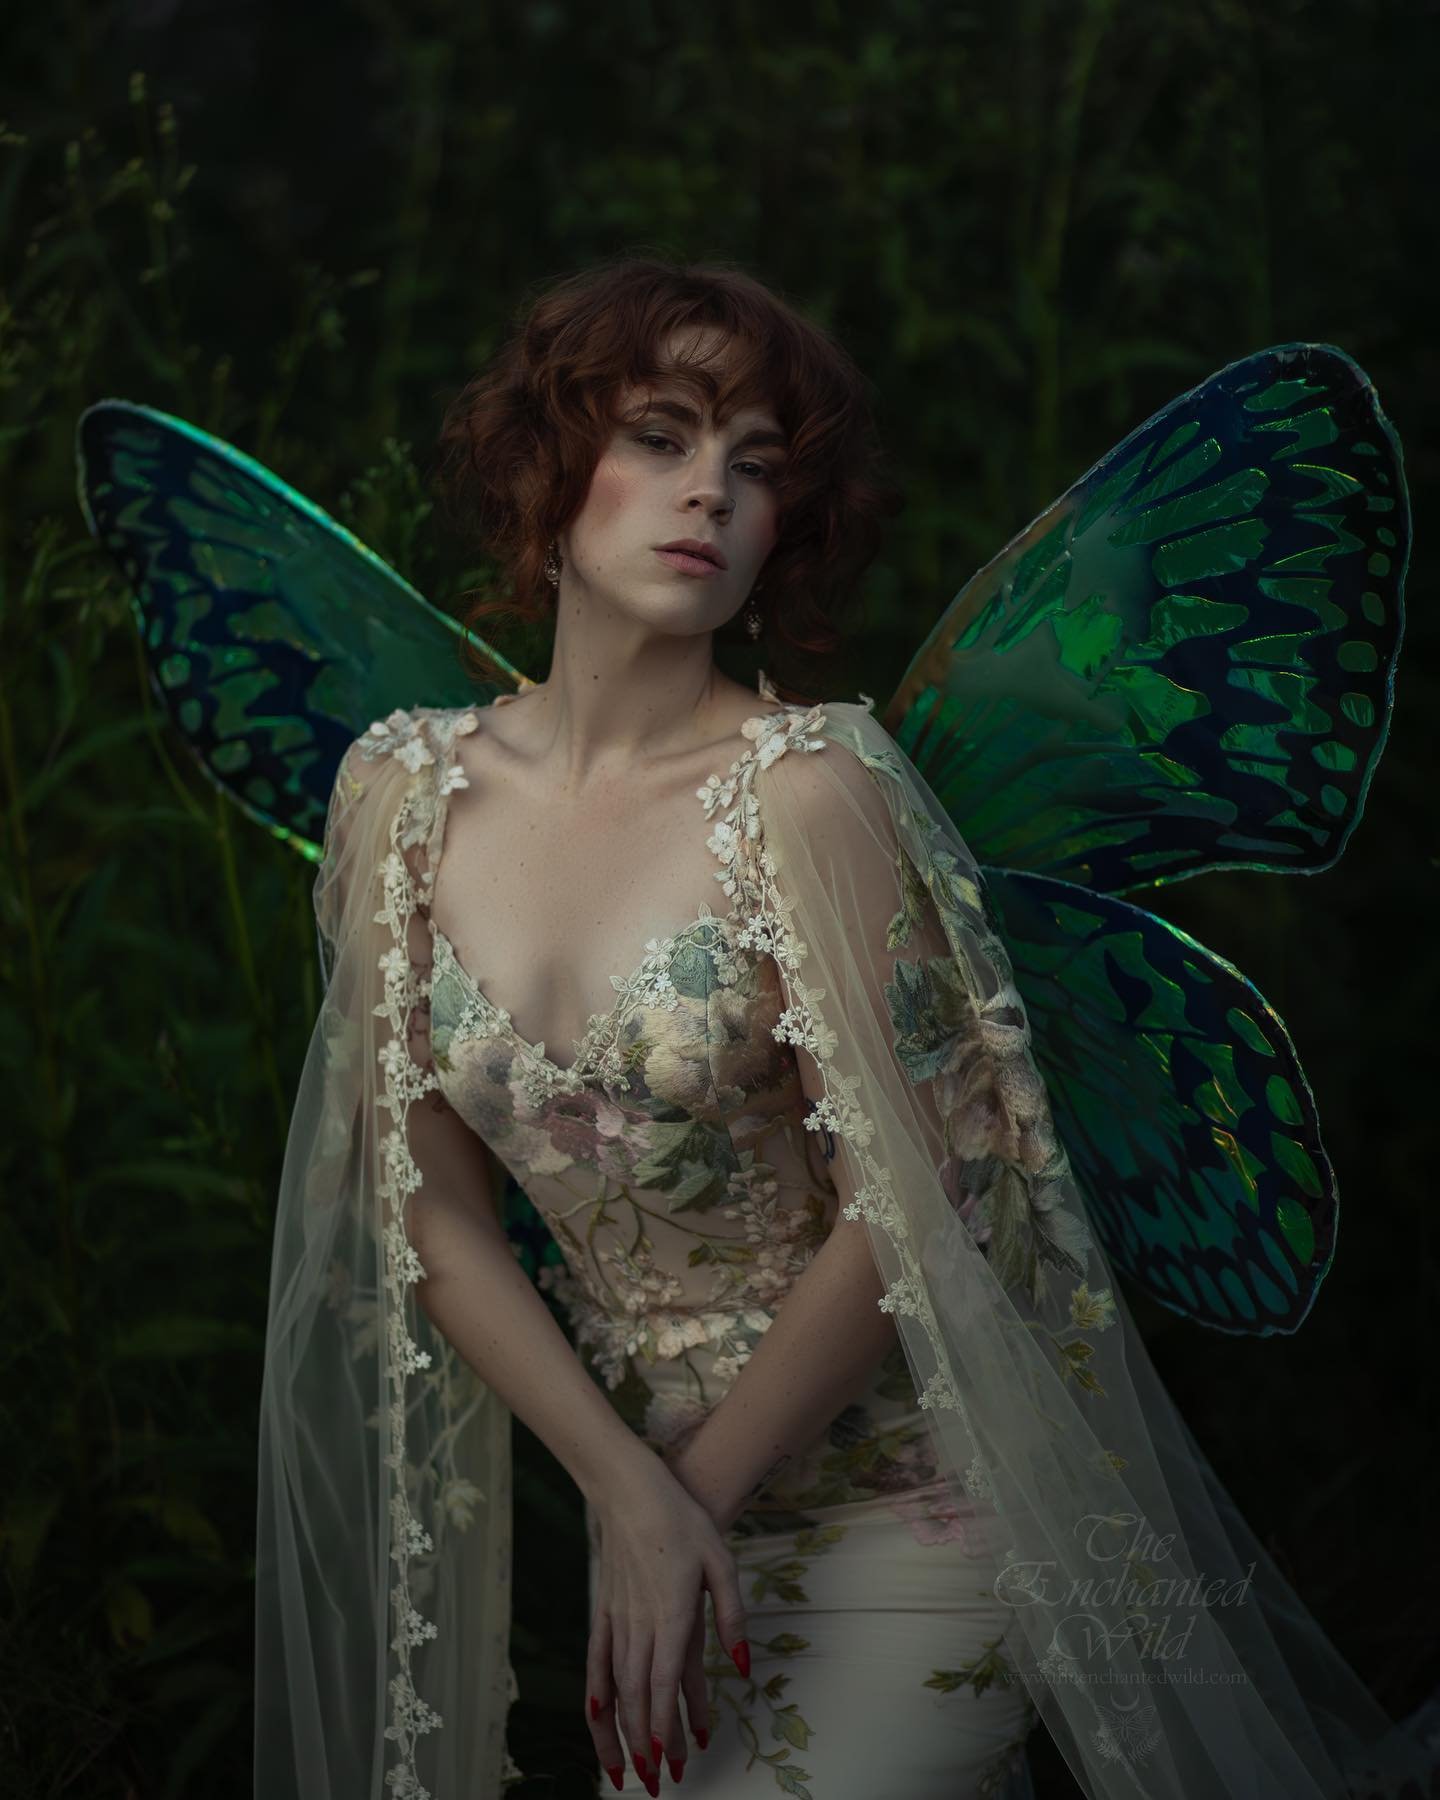 Collaborated with one of my favourite faeries to showcase the variety of possibilities we offer! We captured most of the wings available for photoshoots with three different looks. Here is our first with a beautiful royal fae surrounded by glowing li